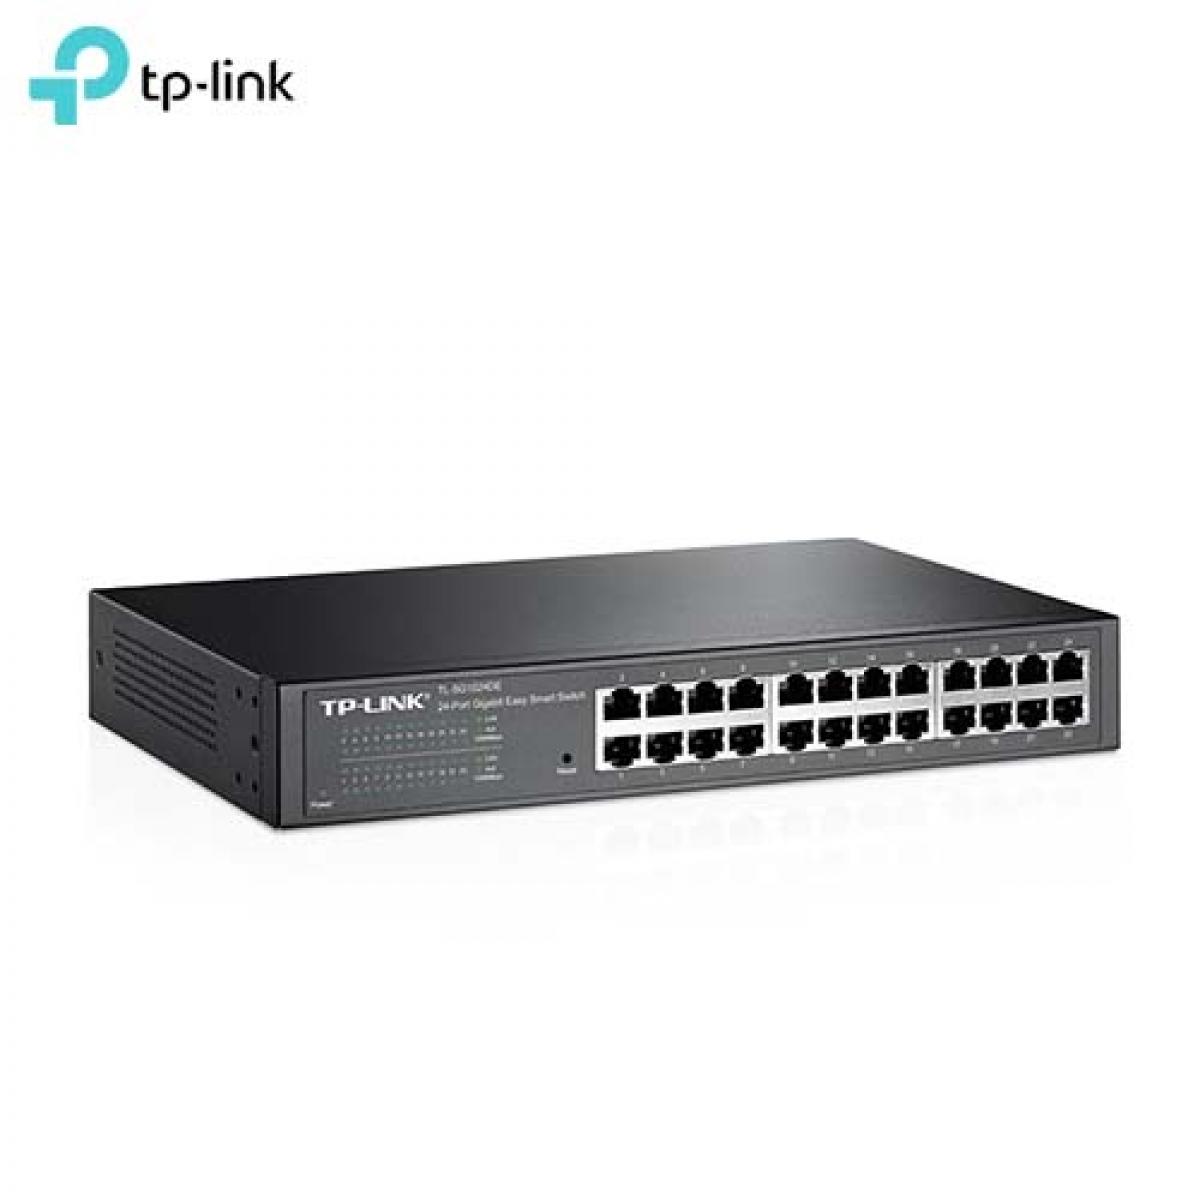 TP-LINK TL-SG1024DE 24-Port Gigabit Easy Smart Switch | Domido.com.my -  Your Kuching Online ICT Products Home & Office Supplier